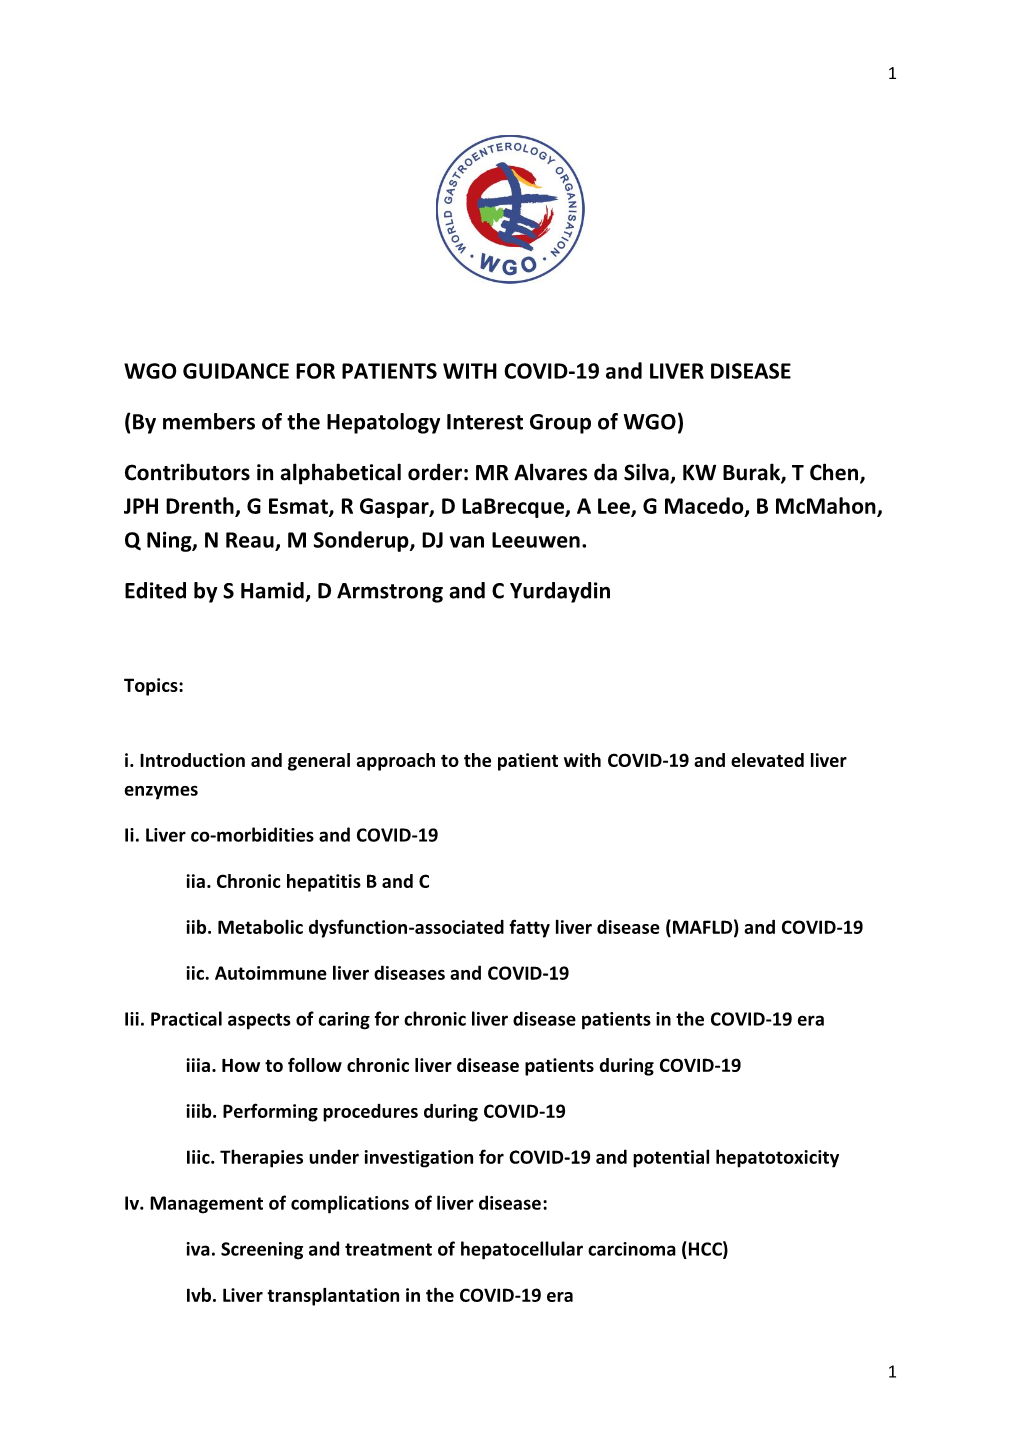 WGO GUIDANCE for PATIENTS with COVID-19 and LIVER DISEASE